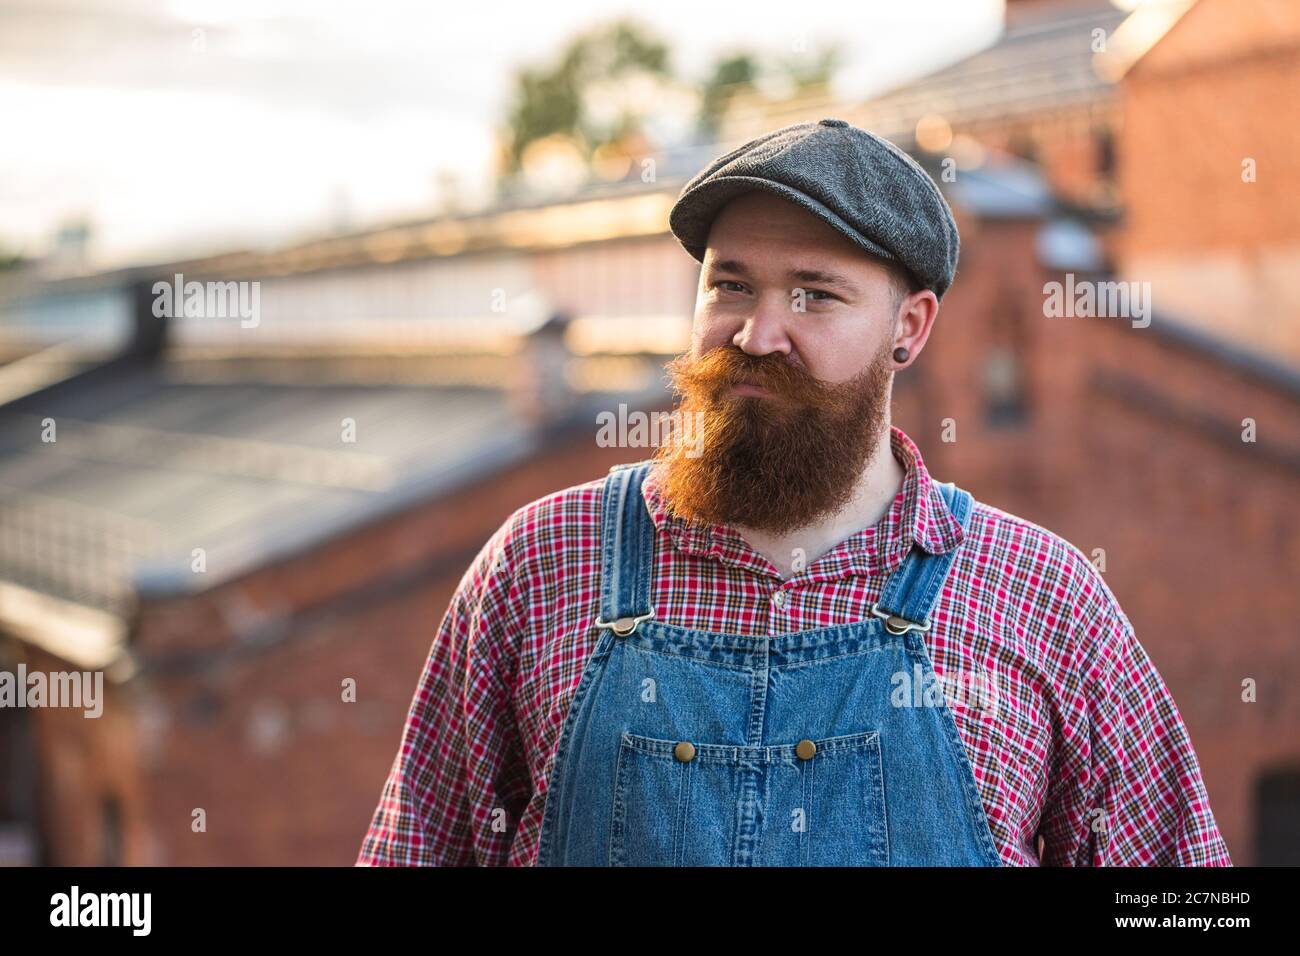 Portrait of brutal bearded stylish craftsman wearing blue overalls, checked shirt and cap in vintage style of the mid 20th century, looking at camera Stock Photo